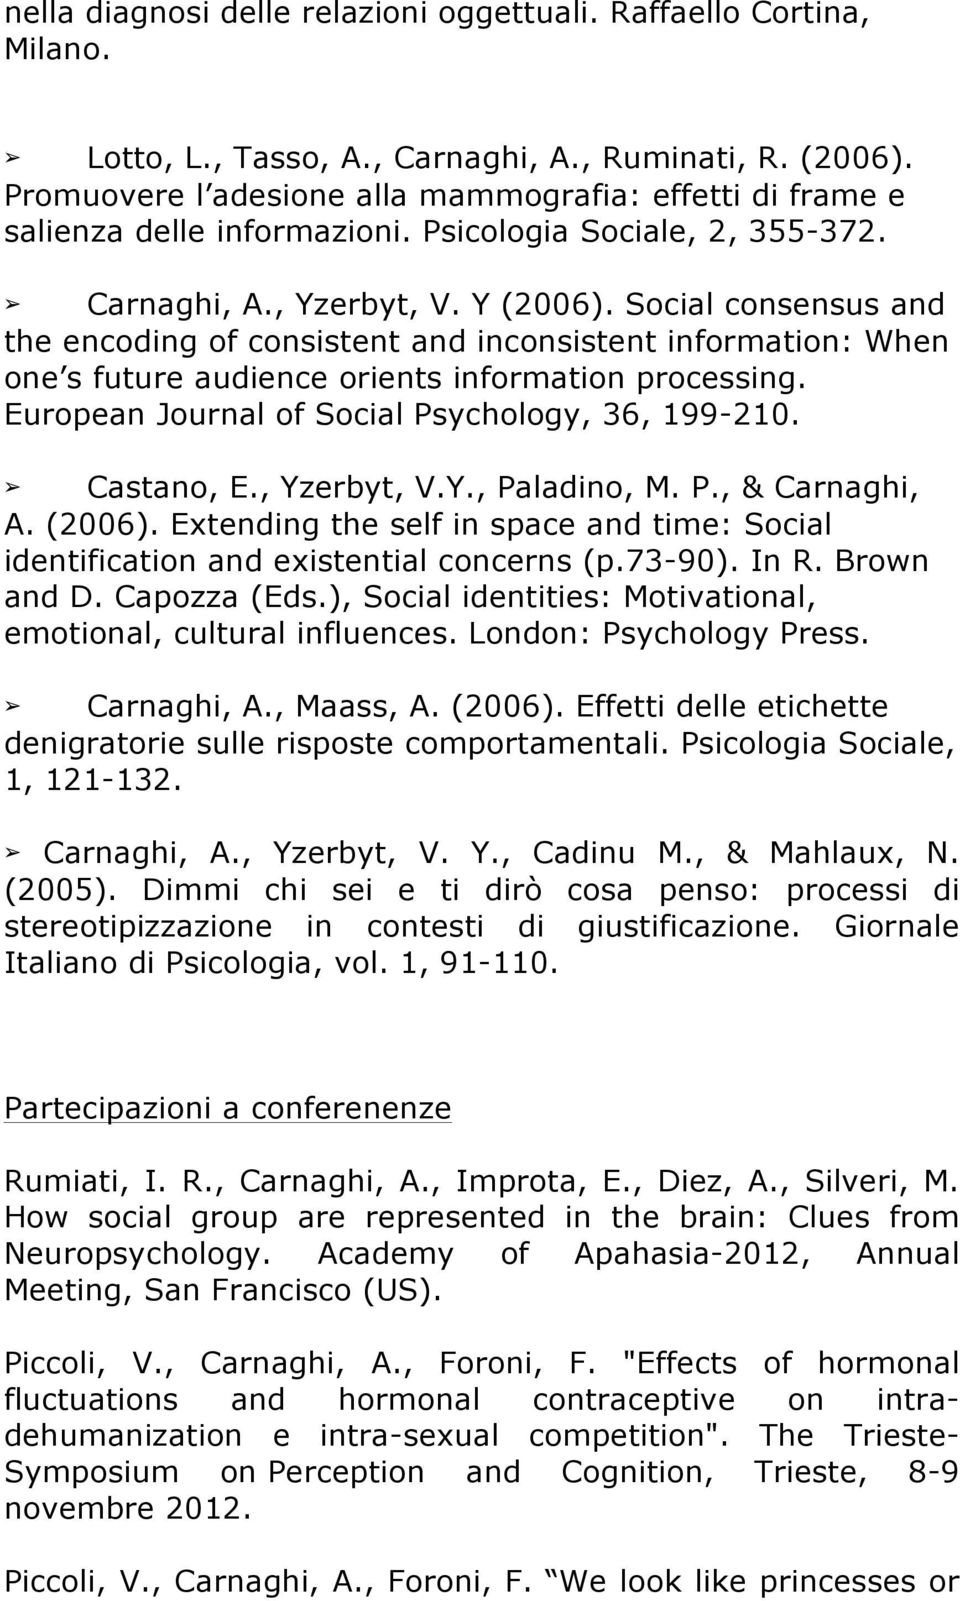 Social consensus and the encoding of consistent and inconsistent information: When one s future audience orients information processing. European Journal of Social Psychology, 36, 199-210. Castano, E.